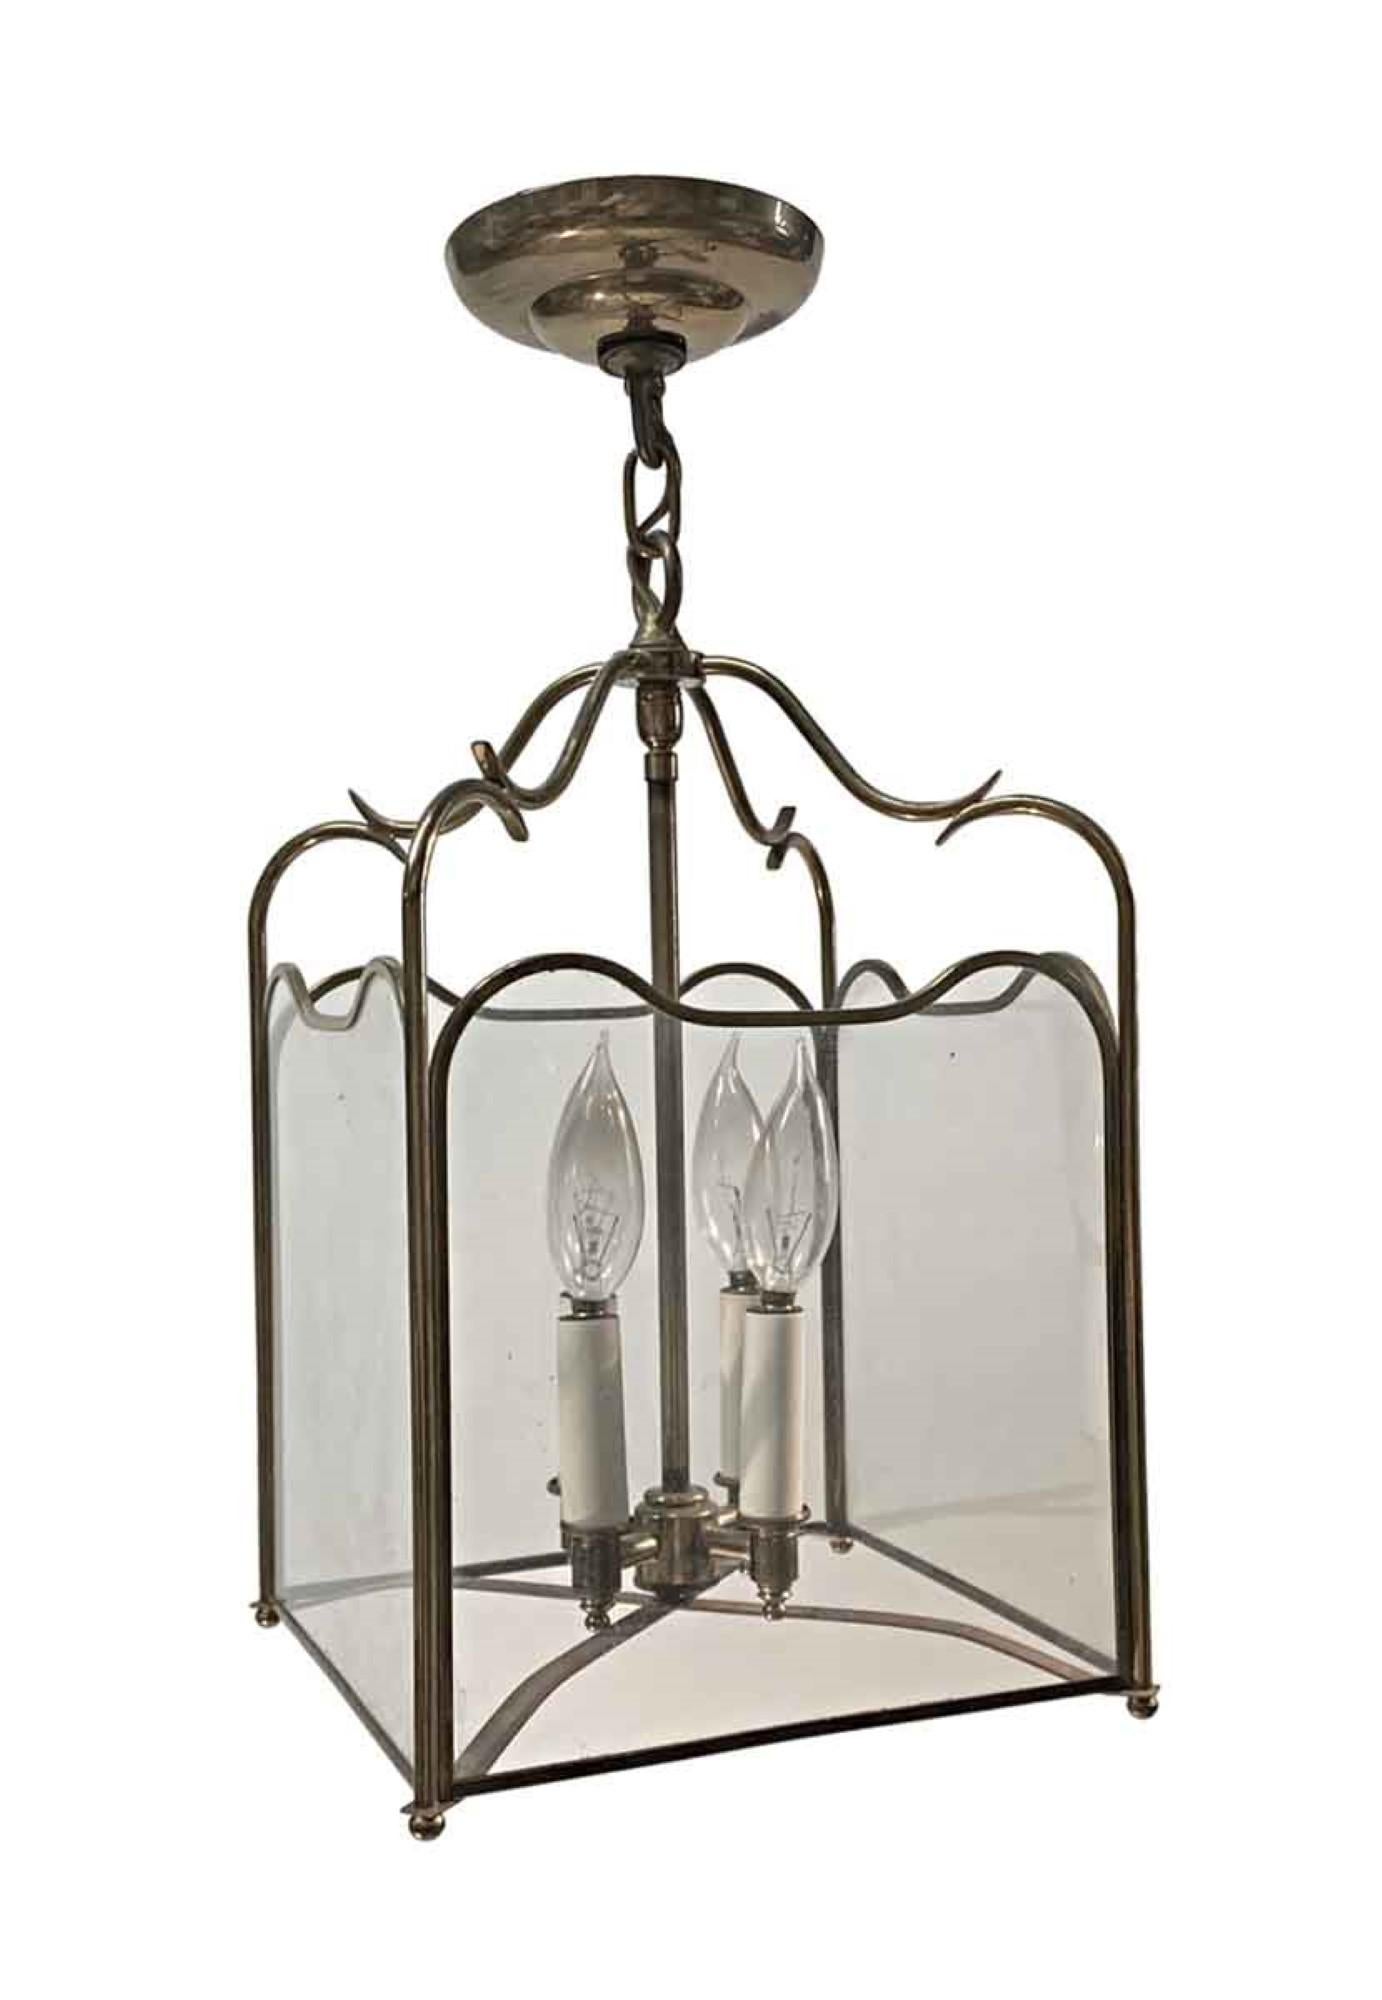 Traditional style 1950s polished brass and clear glass foyer light. Featuring four candelabra bulbs at 60 watts each max. This can be viewed at our Scranton, Pennsylvania location. Please inquire for the exact address.